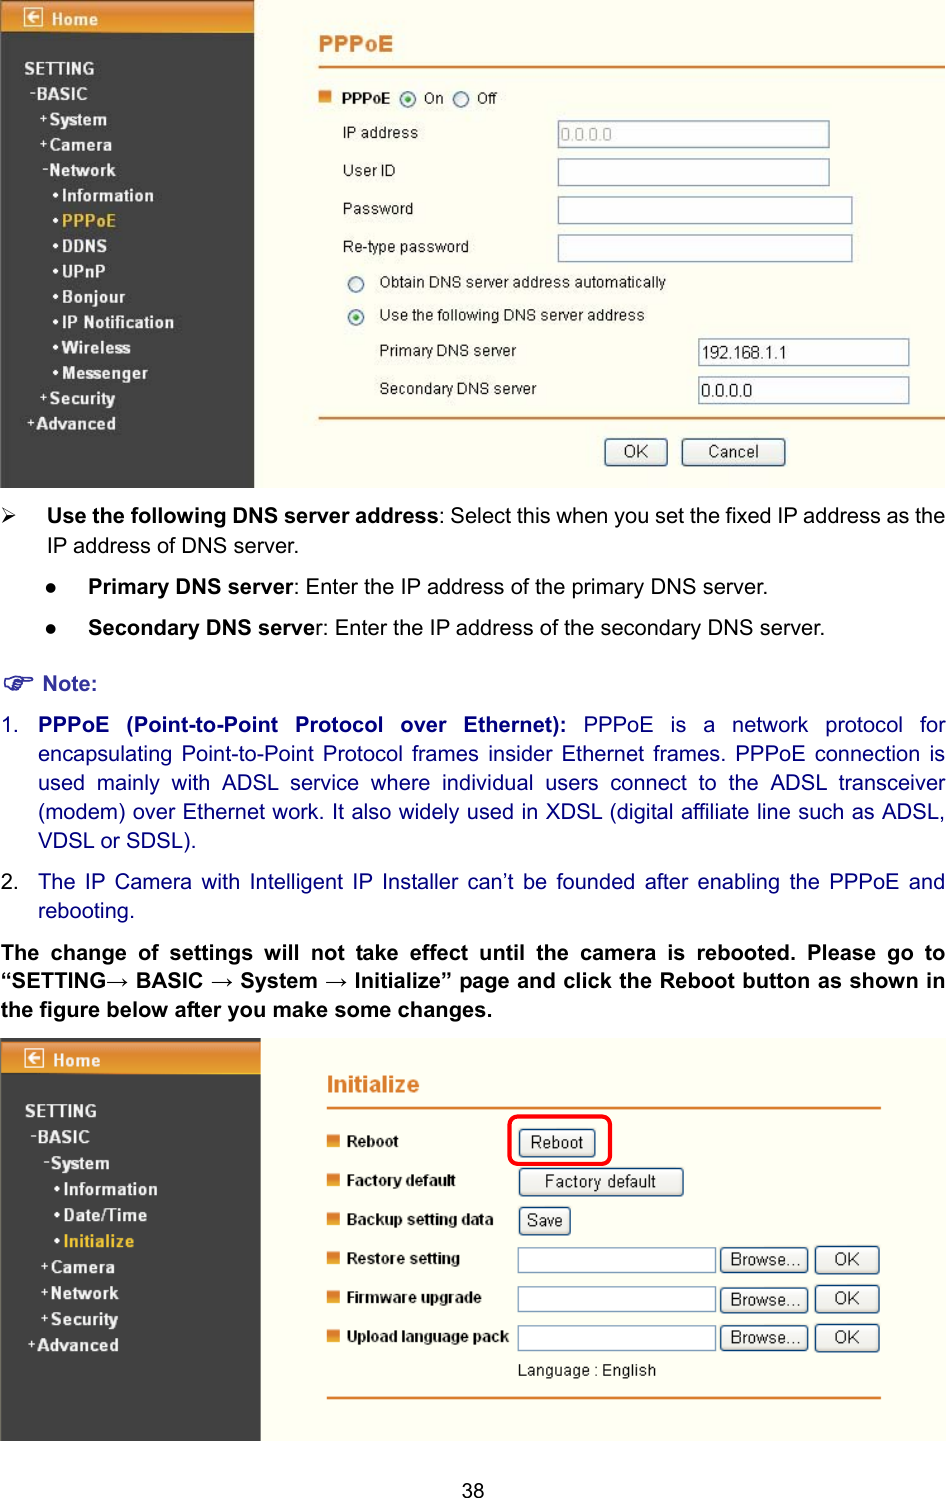 38  ¾ Use the following DNS server address: Select this when you set the fixed IP address as the IP address of DNS server. z Primary DNS server: Enter the IP address of the primary DNS server. z Secondary DNS server: Enter the IP address of the secondary DNS server. ) Note: 1.  PPPoE (Point-to-Point Protocol over Ethernet): PPPoE is a network protocol for encapsulating Point-to-Point Protocol frames insider Ethernet frames. PPPoE connection is used mainly with ADSL service where individual users connect to the ADSL transceiver (modem) over Ethernet work. It also widely used in XDSL (digital affiliate line such as ADSL, VDSL or SDSL). 2.  The IP Camera with Intelligent IP Installer can’t be founded after enabling the PPPoE and rebooting. The change of settings will not take effect until the camera is rebooted. Please go to “SETTING→ BASIC → System → Initialize” page and click the Reboot button as shown in the figure below after you make some changes.  